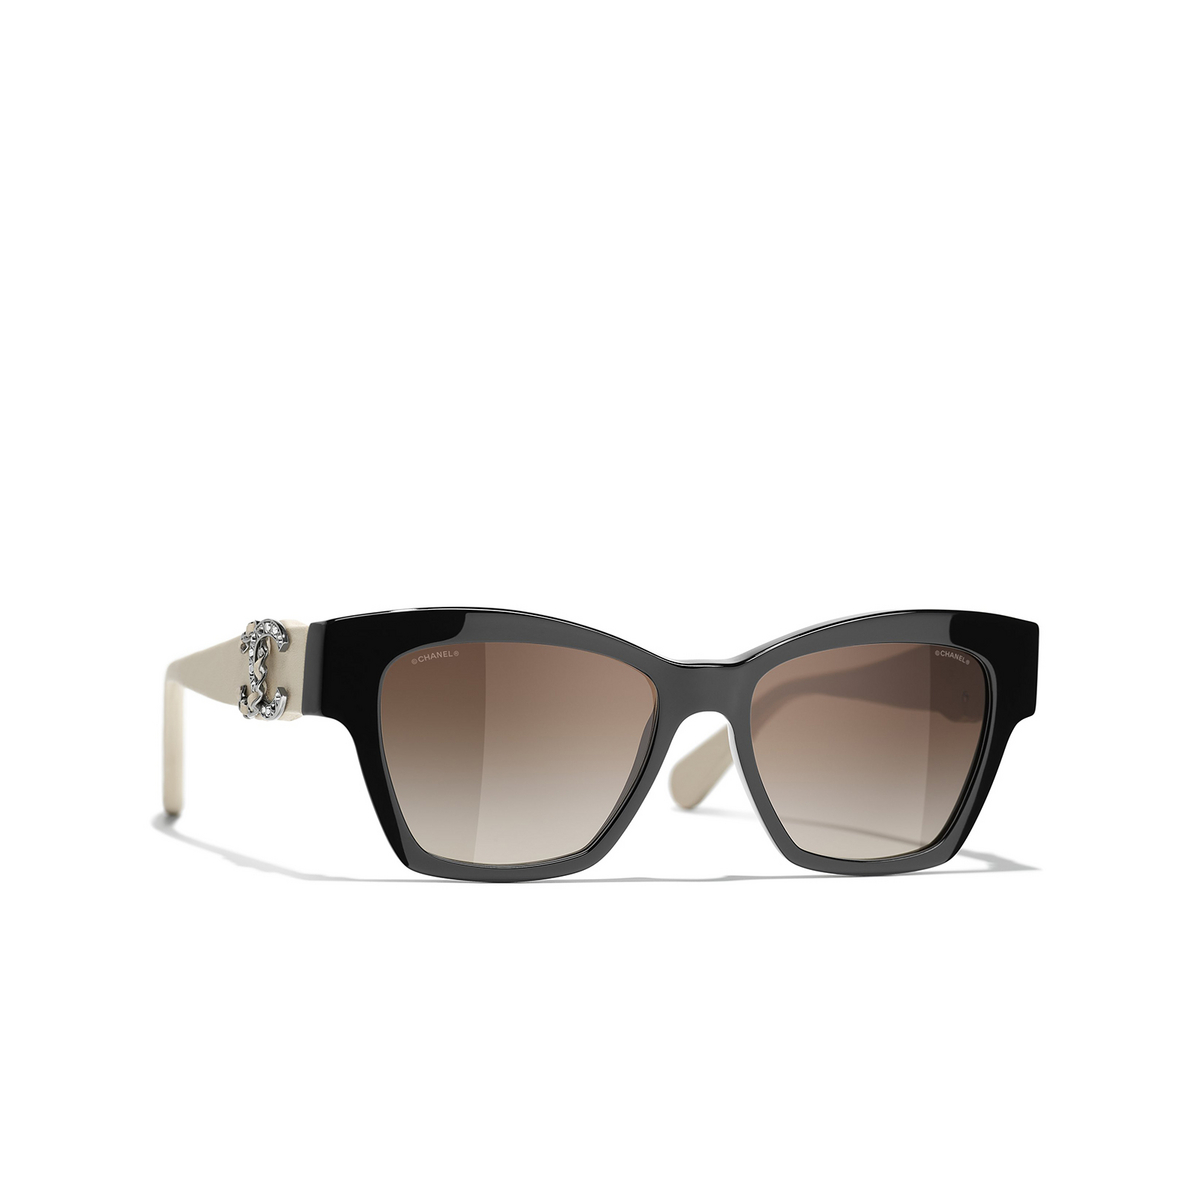 CHANEL butterfly Sunglasses C501S5 Black - three-quarters view